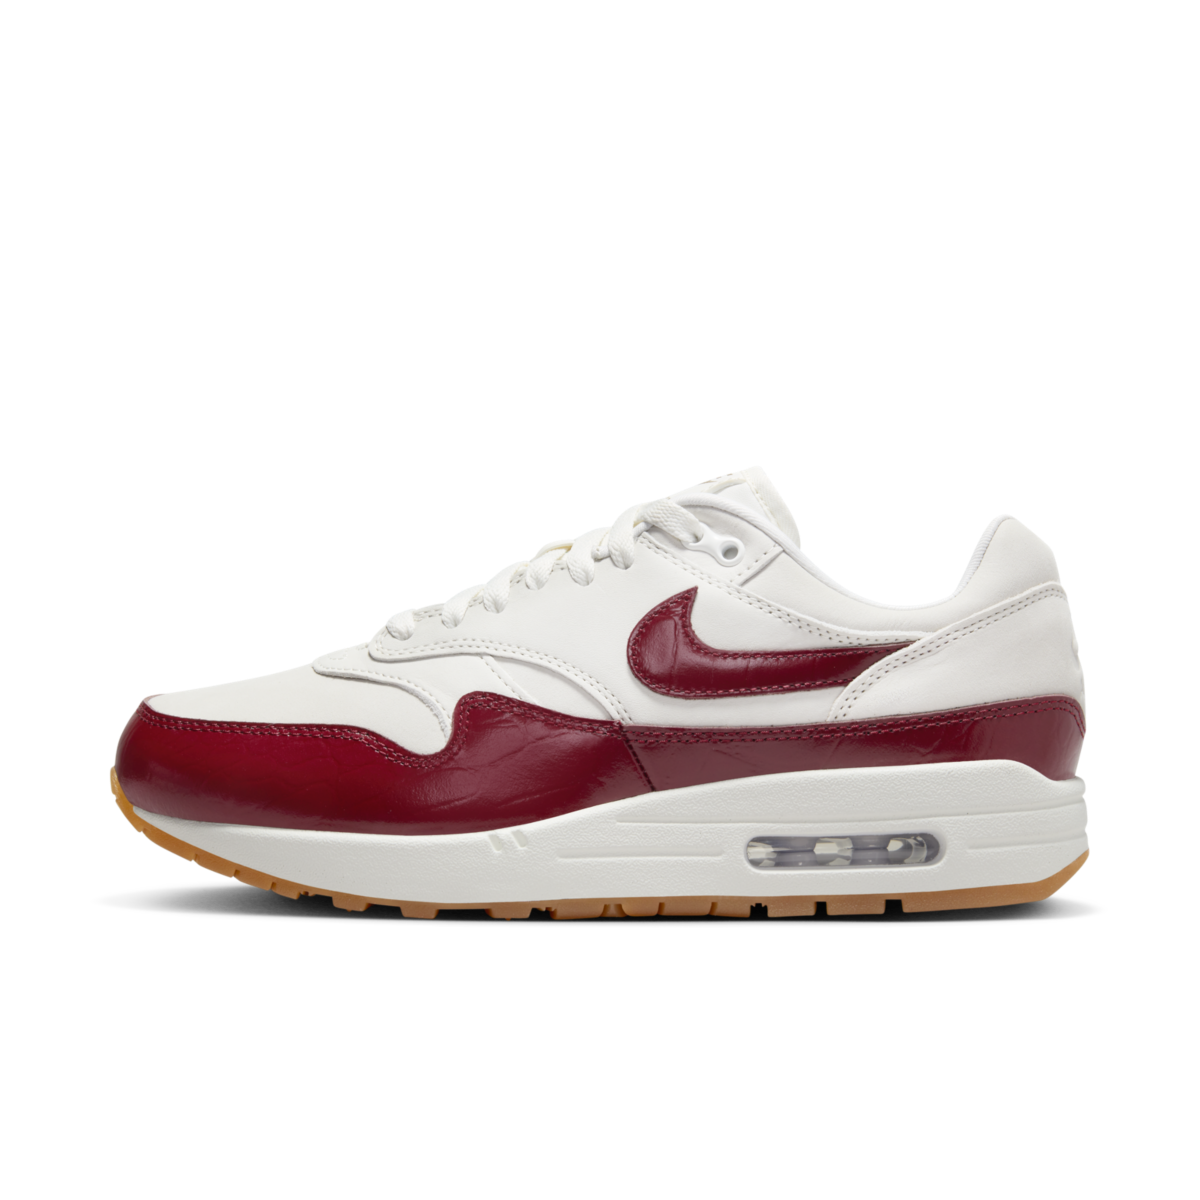 Nike Air Max 1 LX 'Team Red Leather'